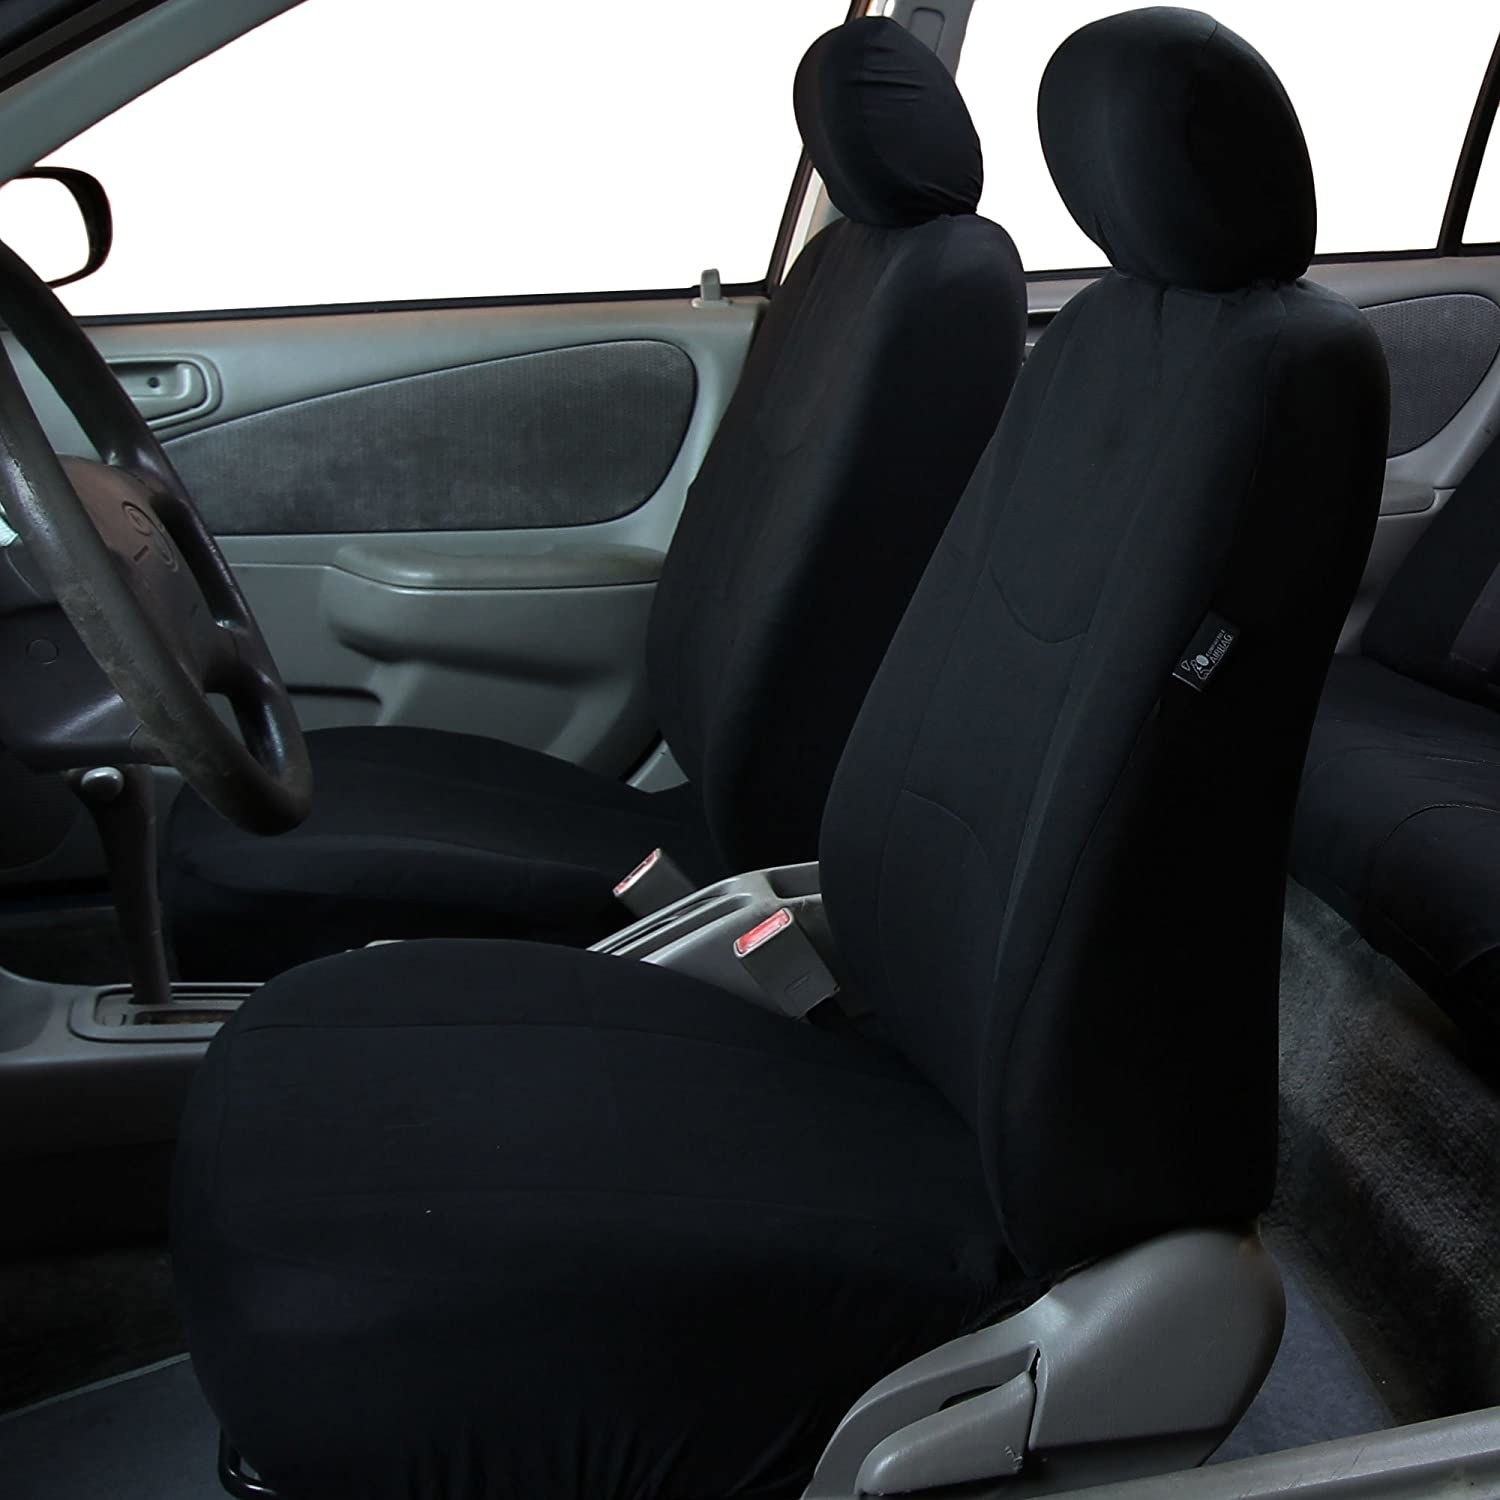 The front seats of a car with covers on them